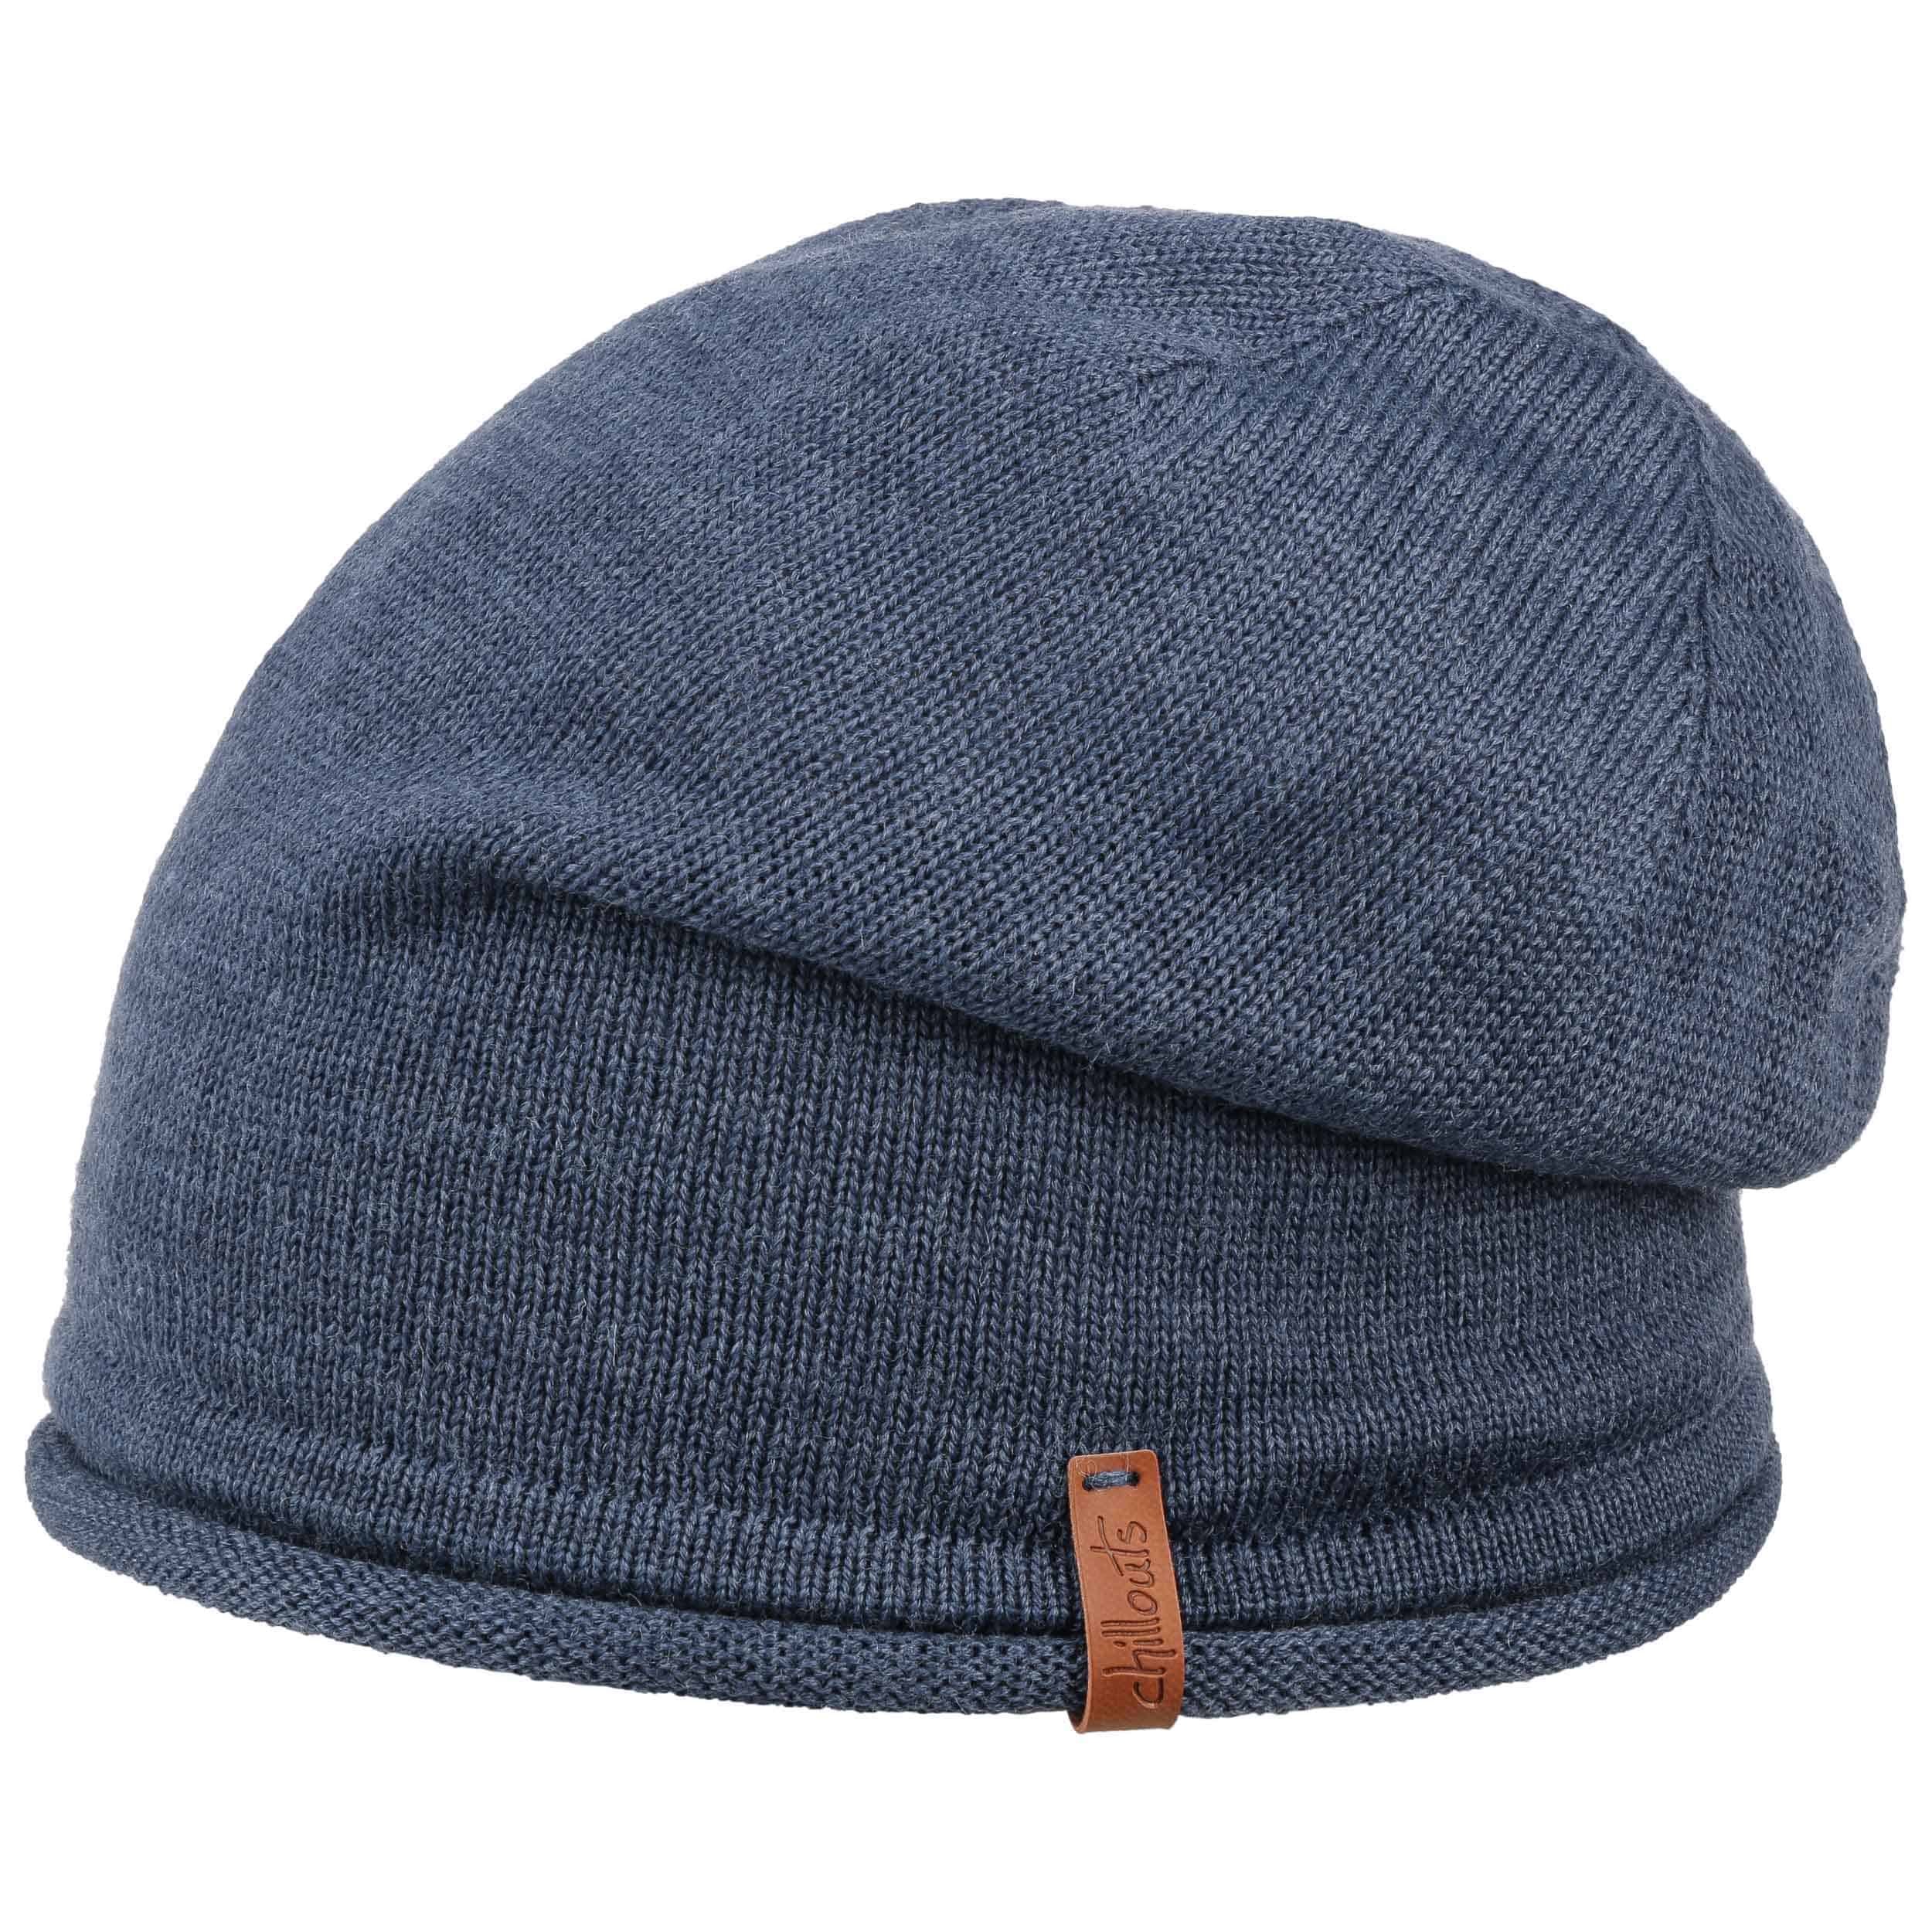 Beanie Leicester Chillouts Oversize by 29,95 - €